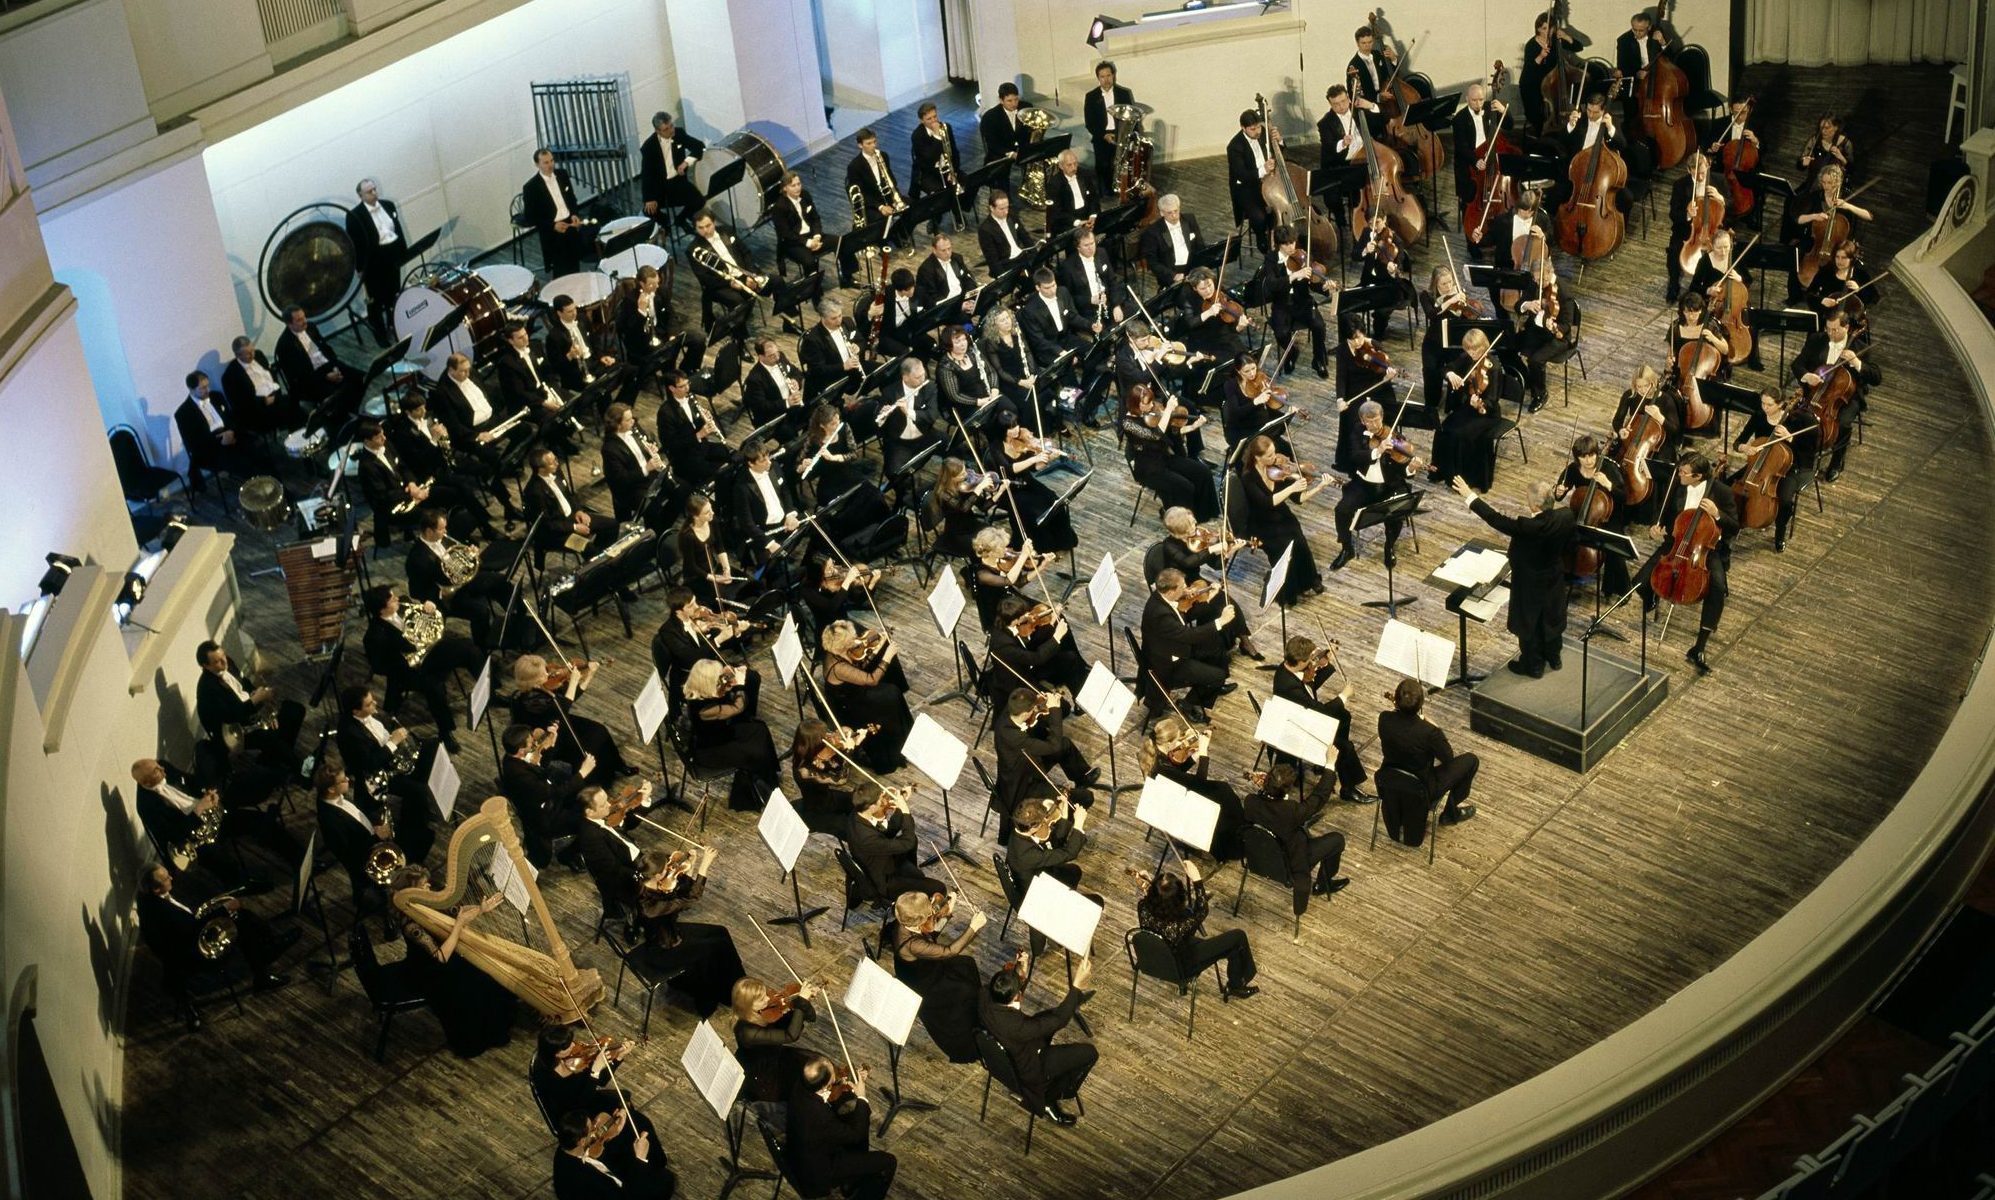 Moscow Philharmonic in action.